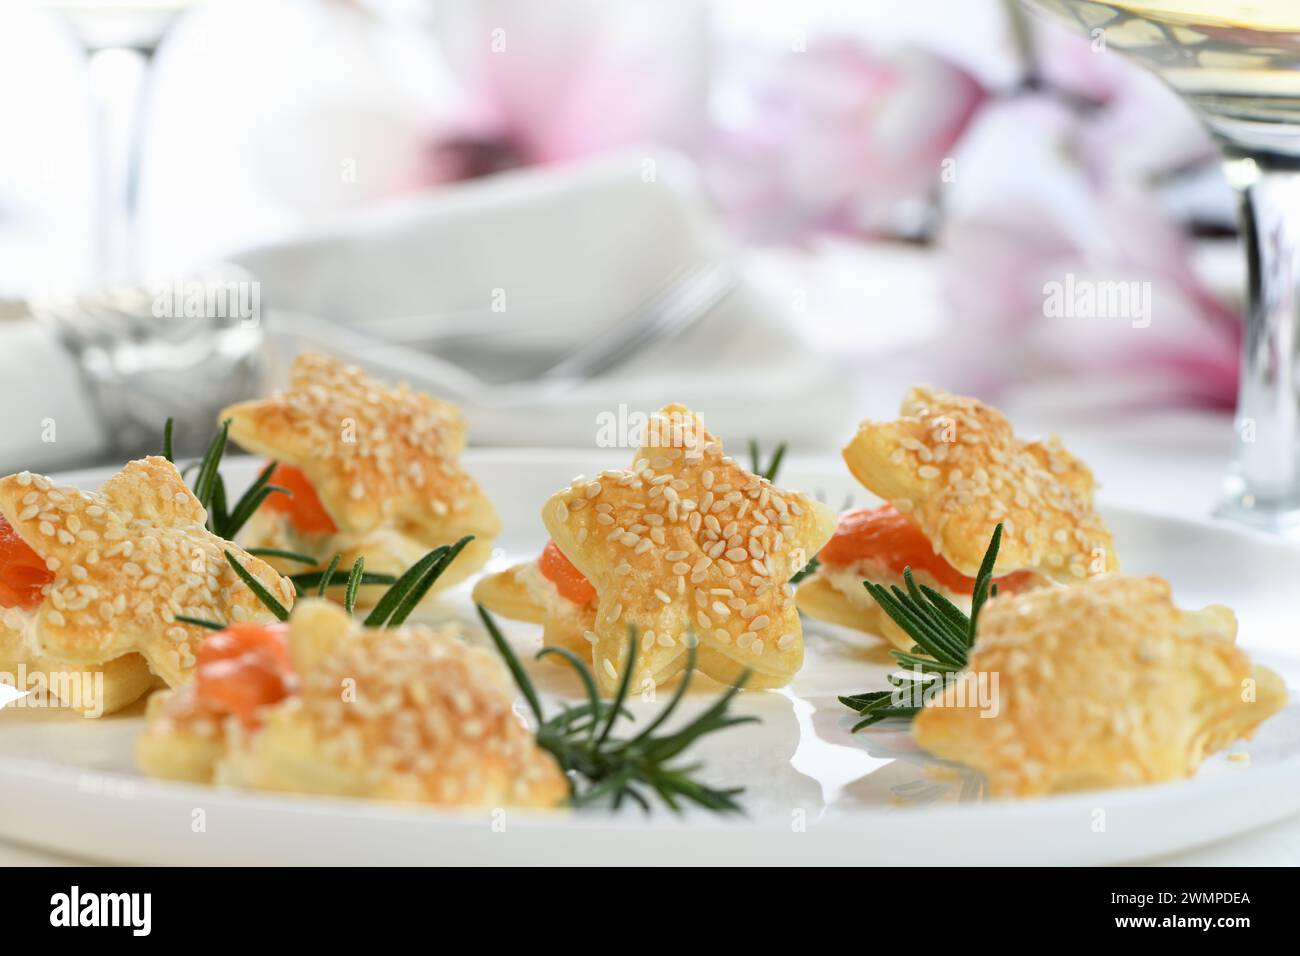 Festive appetizer of puff pastry in the shape of a star, stuffed with salmon and soft cheese. The perfect appetizer for your holiday table. Stock Photo